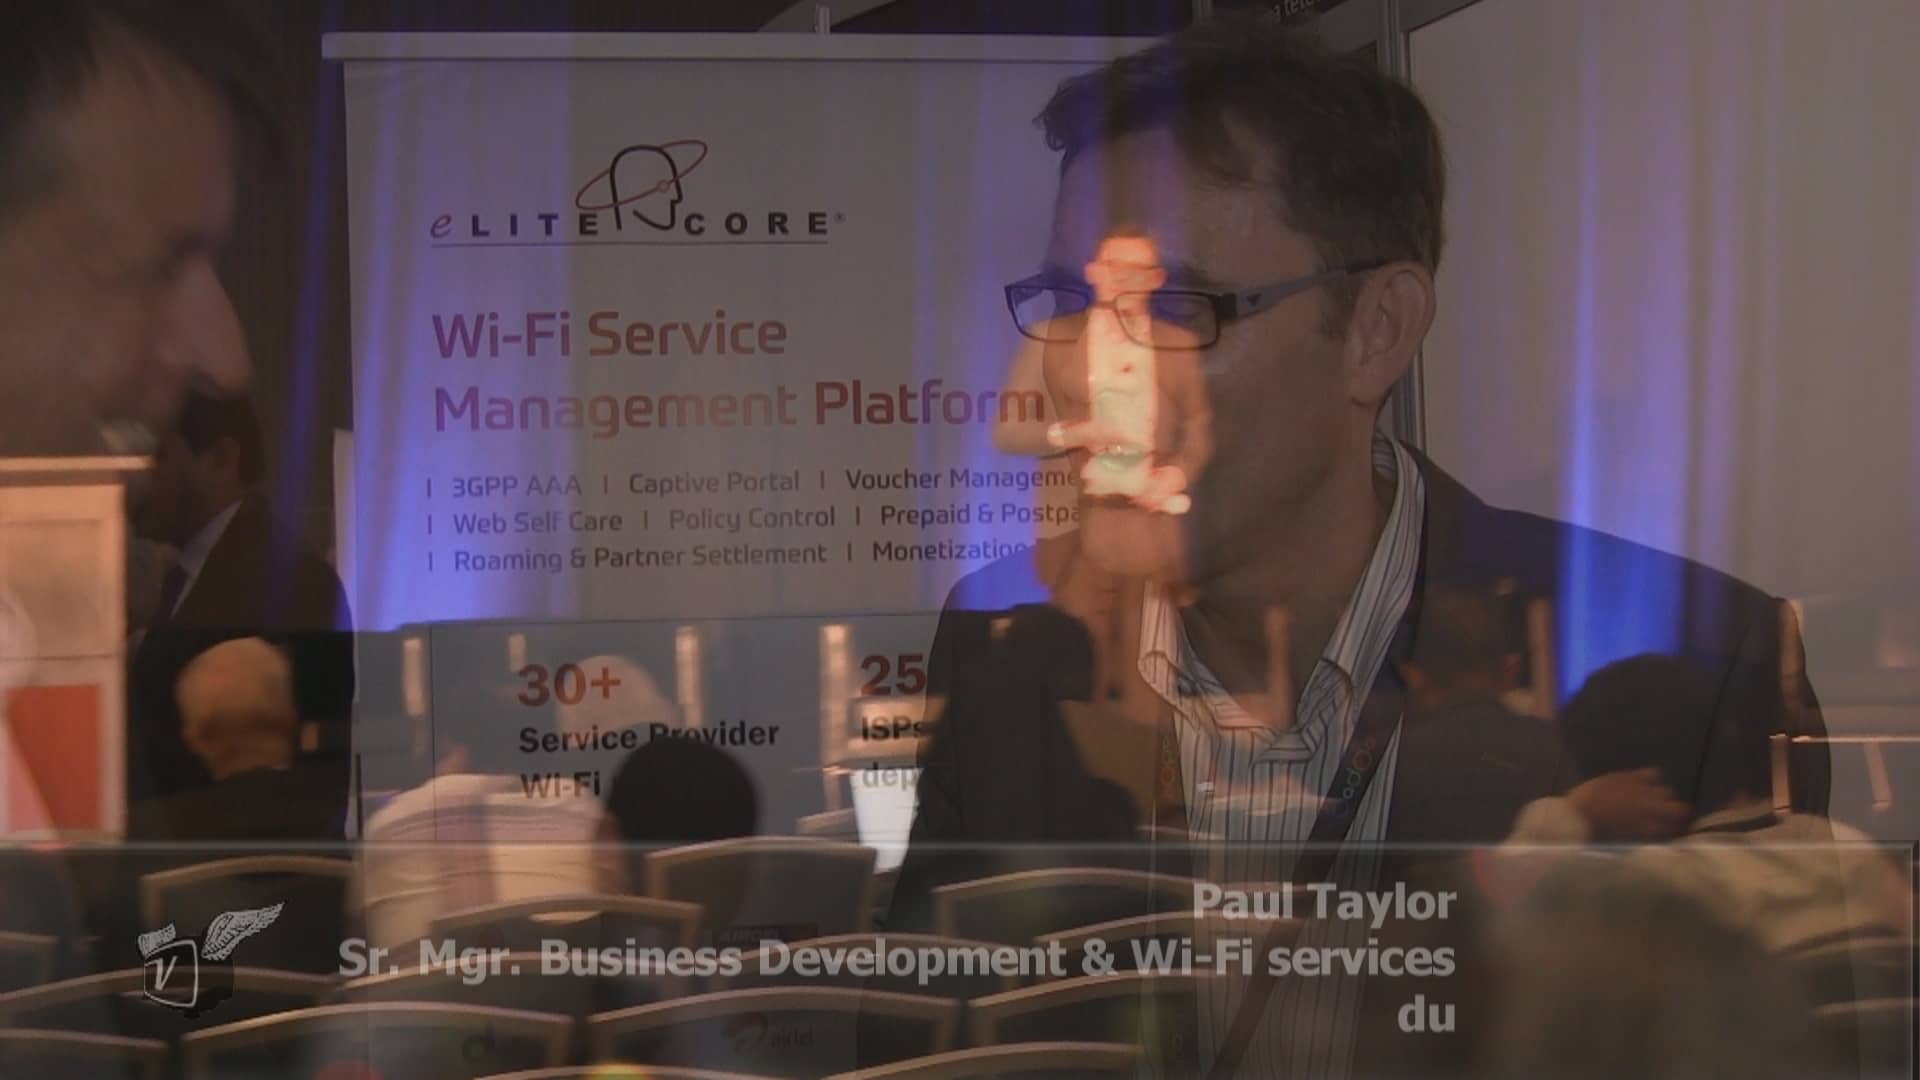 Paul Taylor of du explains how they implemented WiFi as complement to their mobile services.